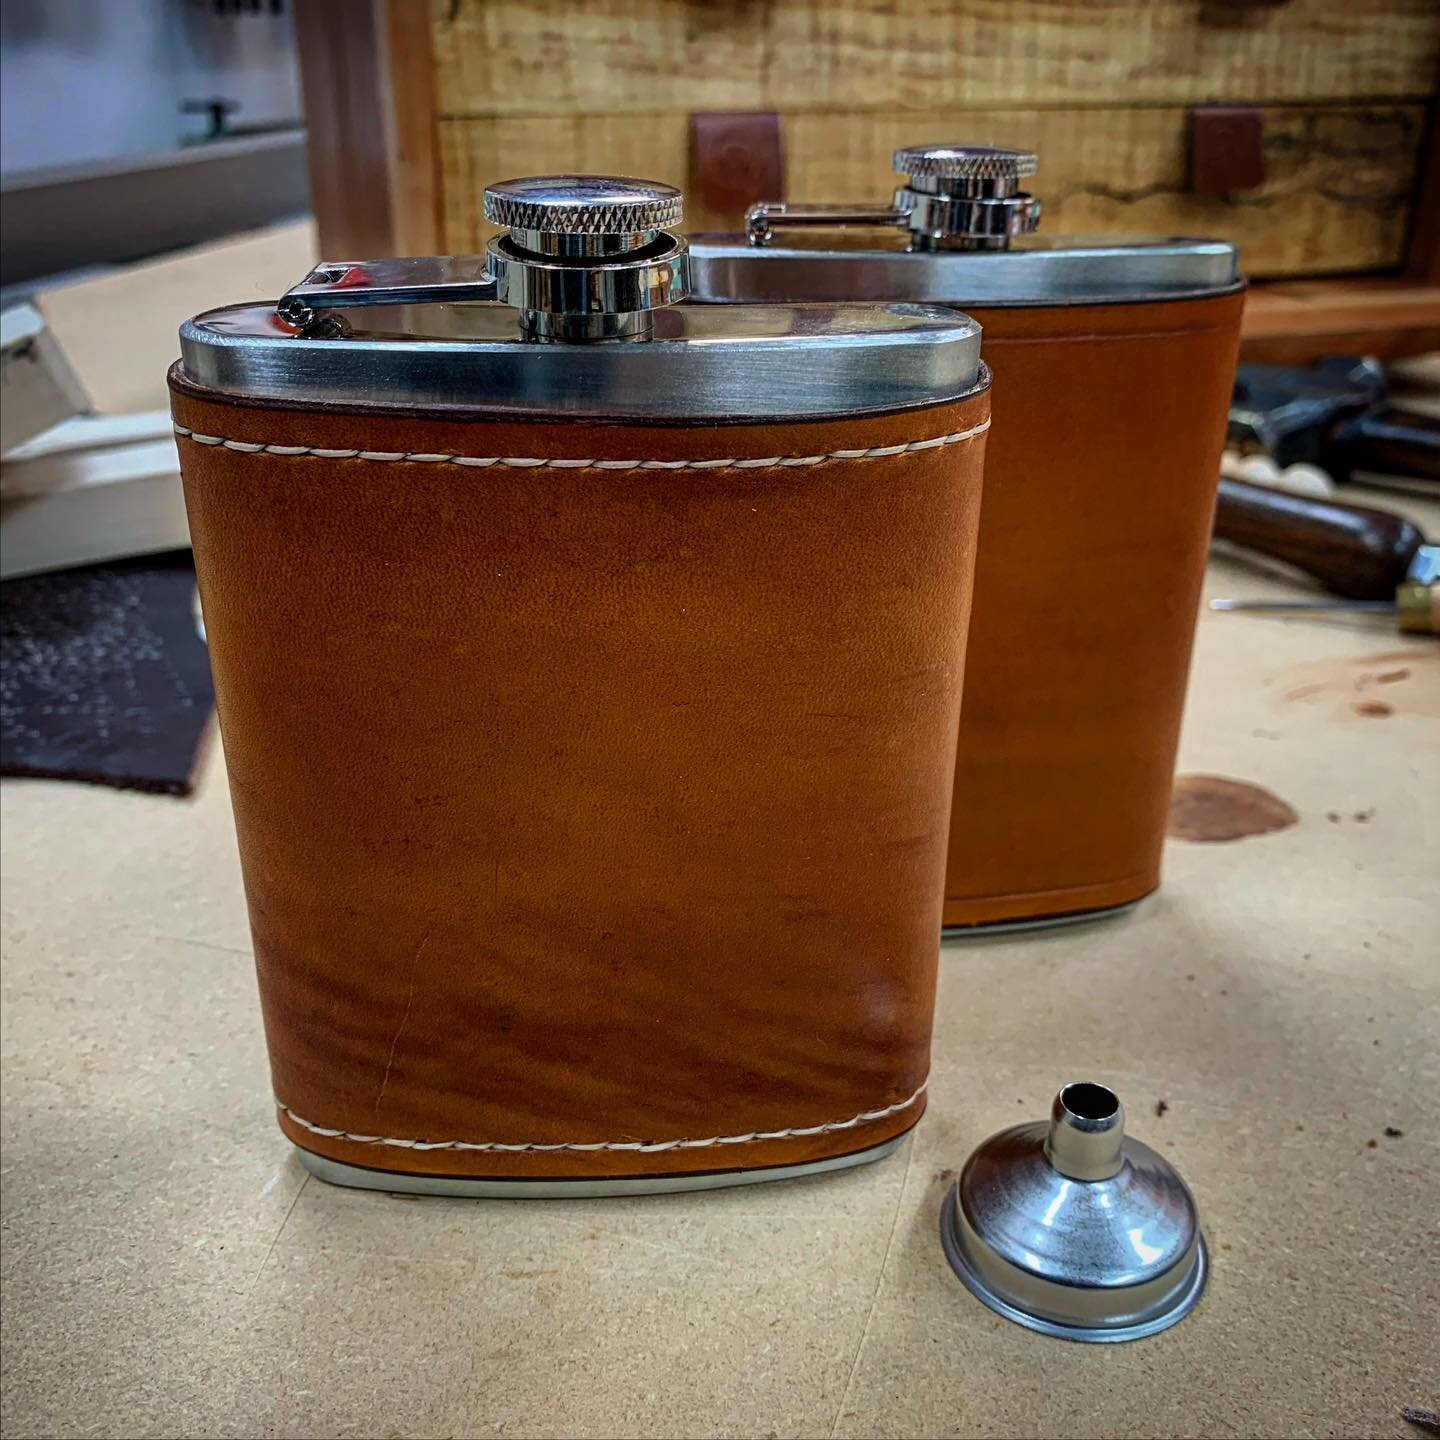 This year&rsquo;s Christmas makers gift was leather covered flasks. I made about 15 of them for various friends. Everyone loved them. I didn&rsquo;t do the stitching on them except for this last one. Opinions on which one is better? #leather #leather